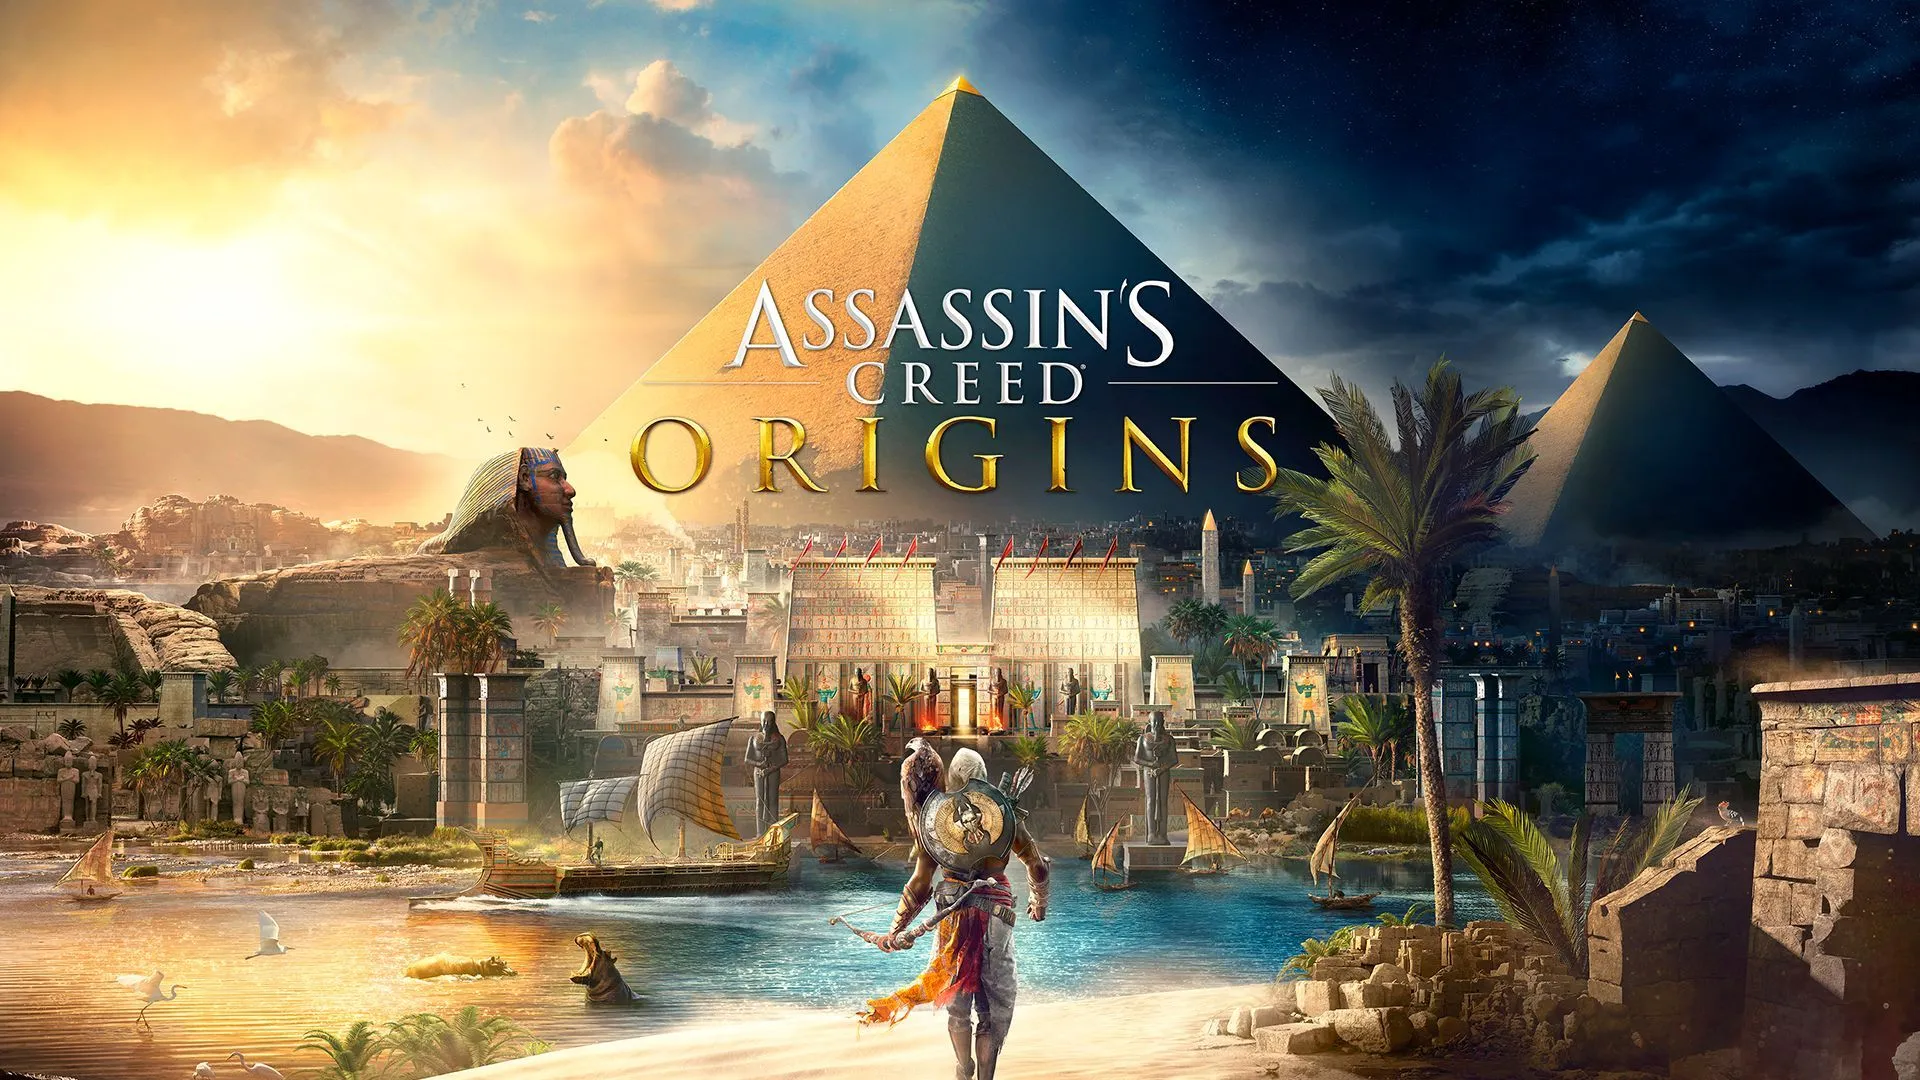 Assassin's Creed Origins game poster with an assassin standing in front of the Nile River, Sphinx, and the pyramids all set in ancient Egypt